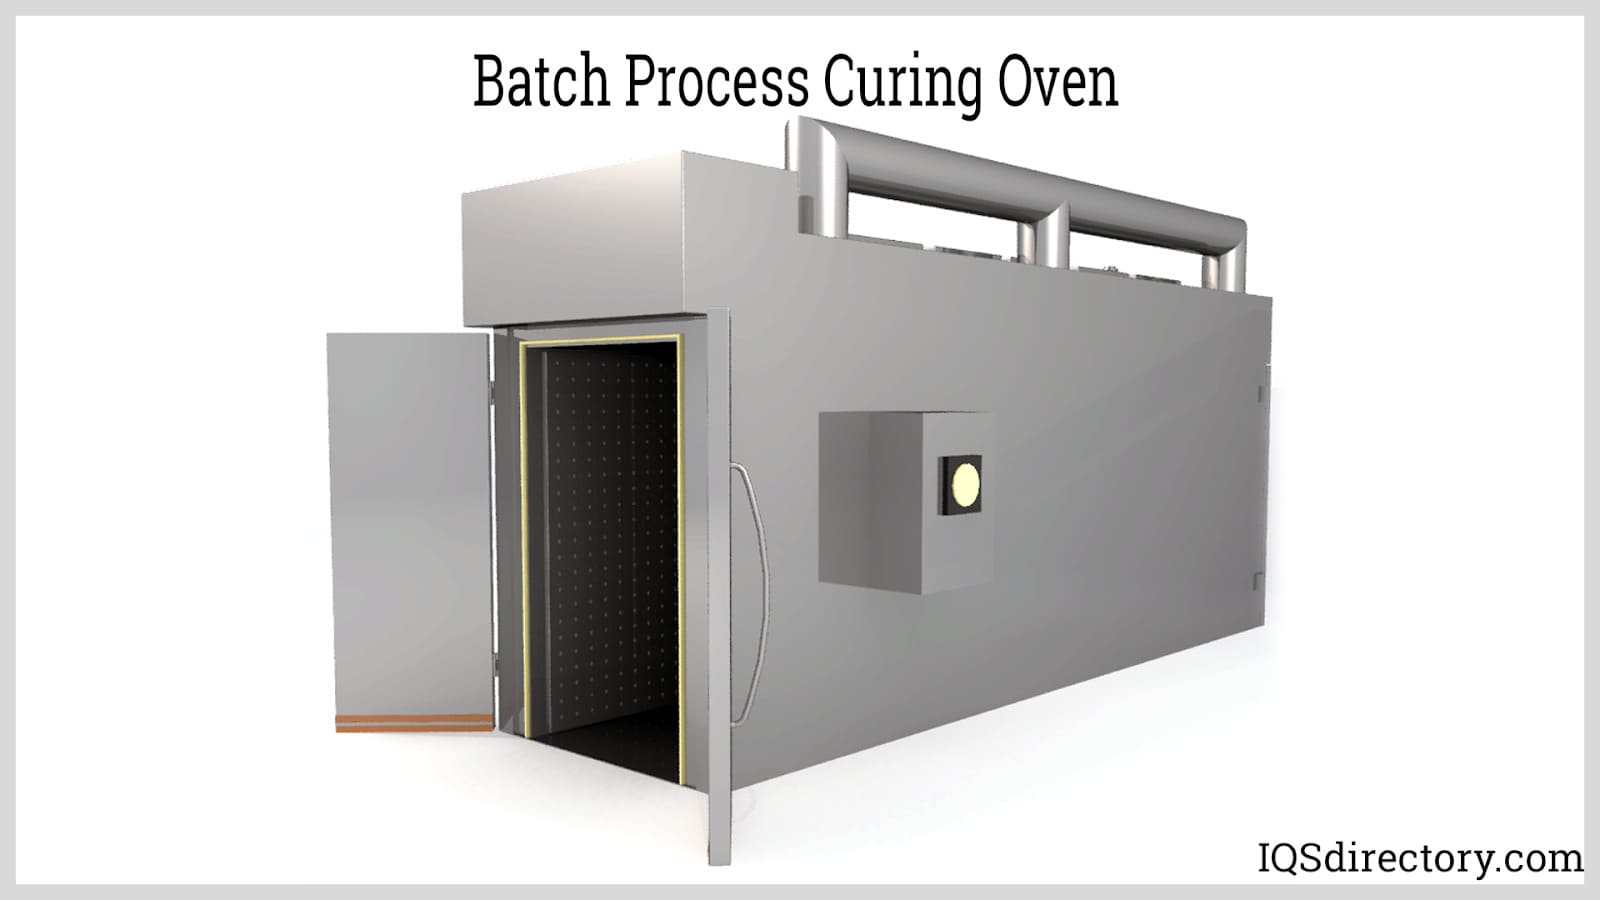 https://www.iqsdirectory.com/articles/industrial-oven/curing-ovens/batch-process-curing-oven.jpg